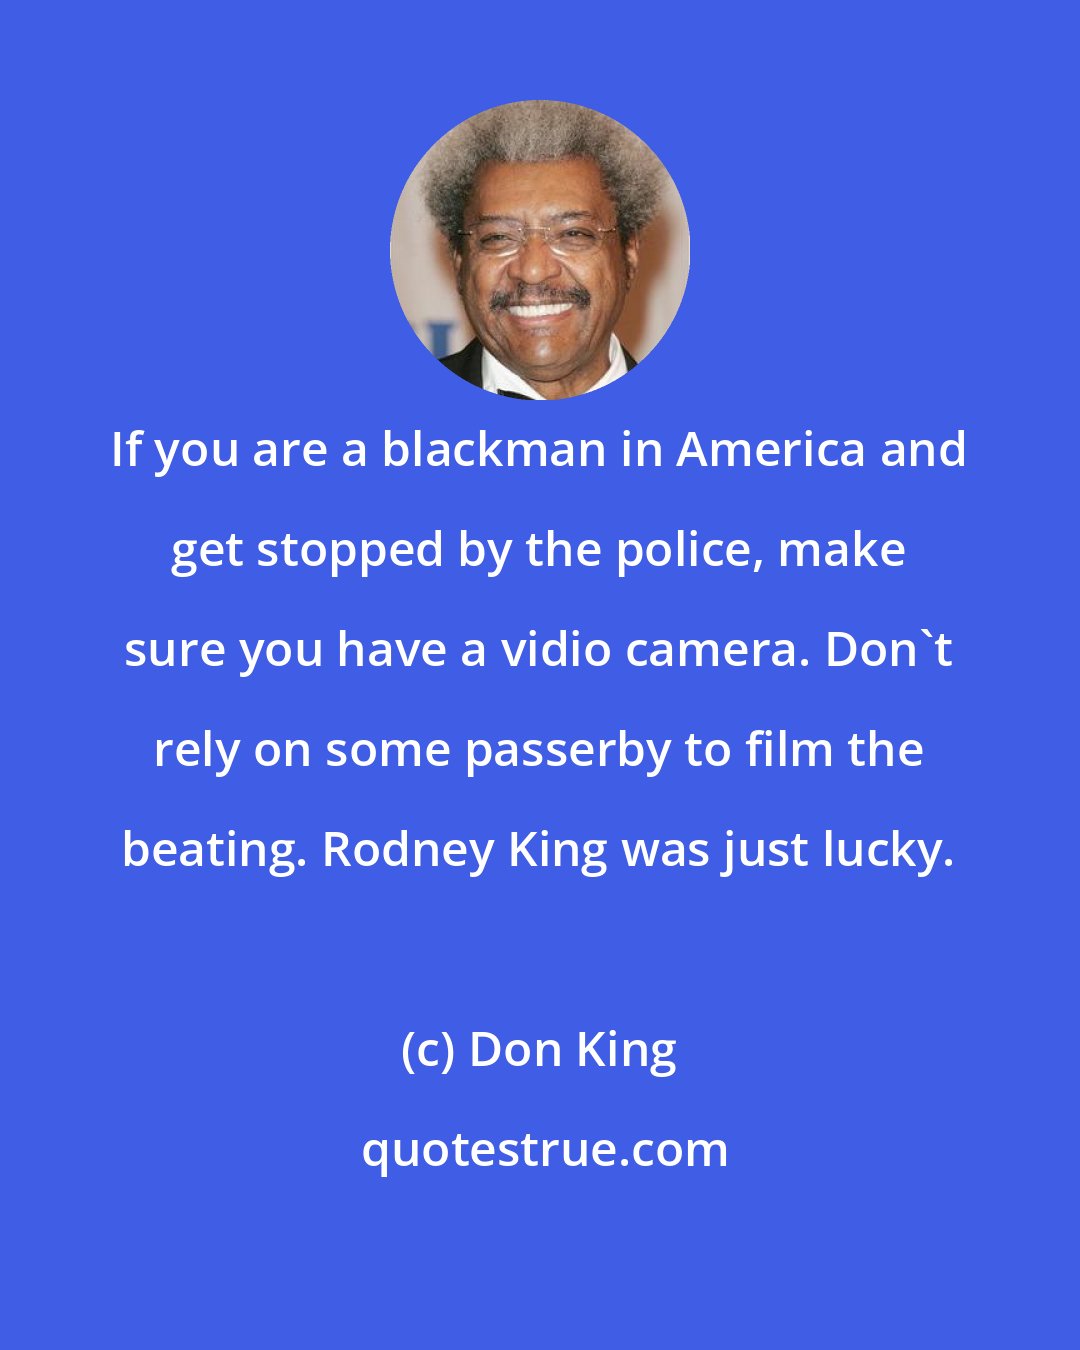 Don King: If you are a blackman in America and get stopped by the police, make sure you have a vidio camera. Don't rely on some passerby to film the beating. Rodney King was just lucky.